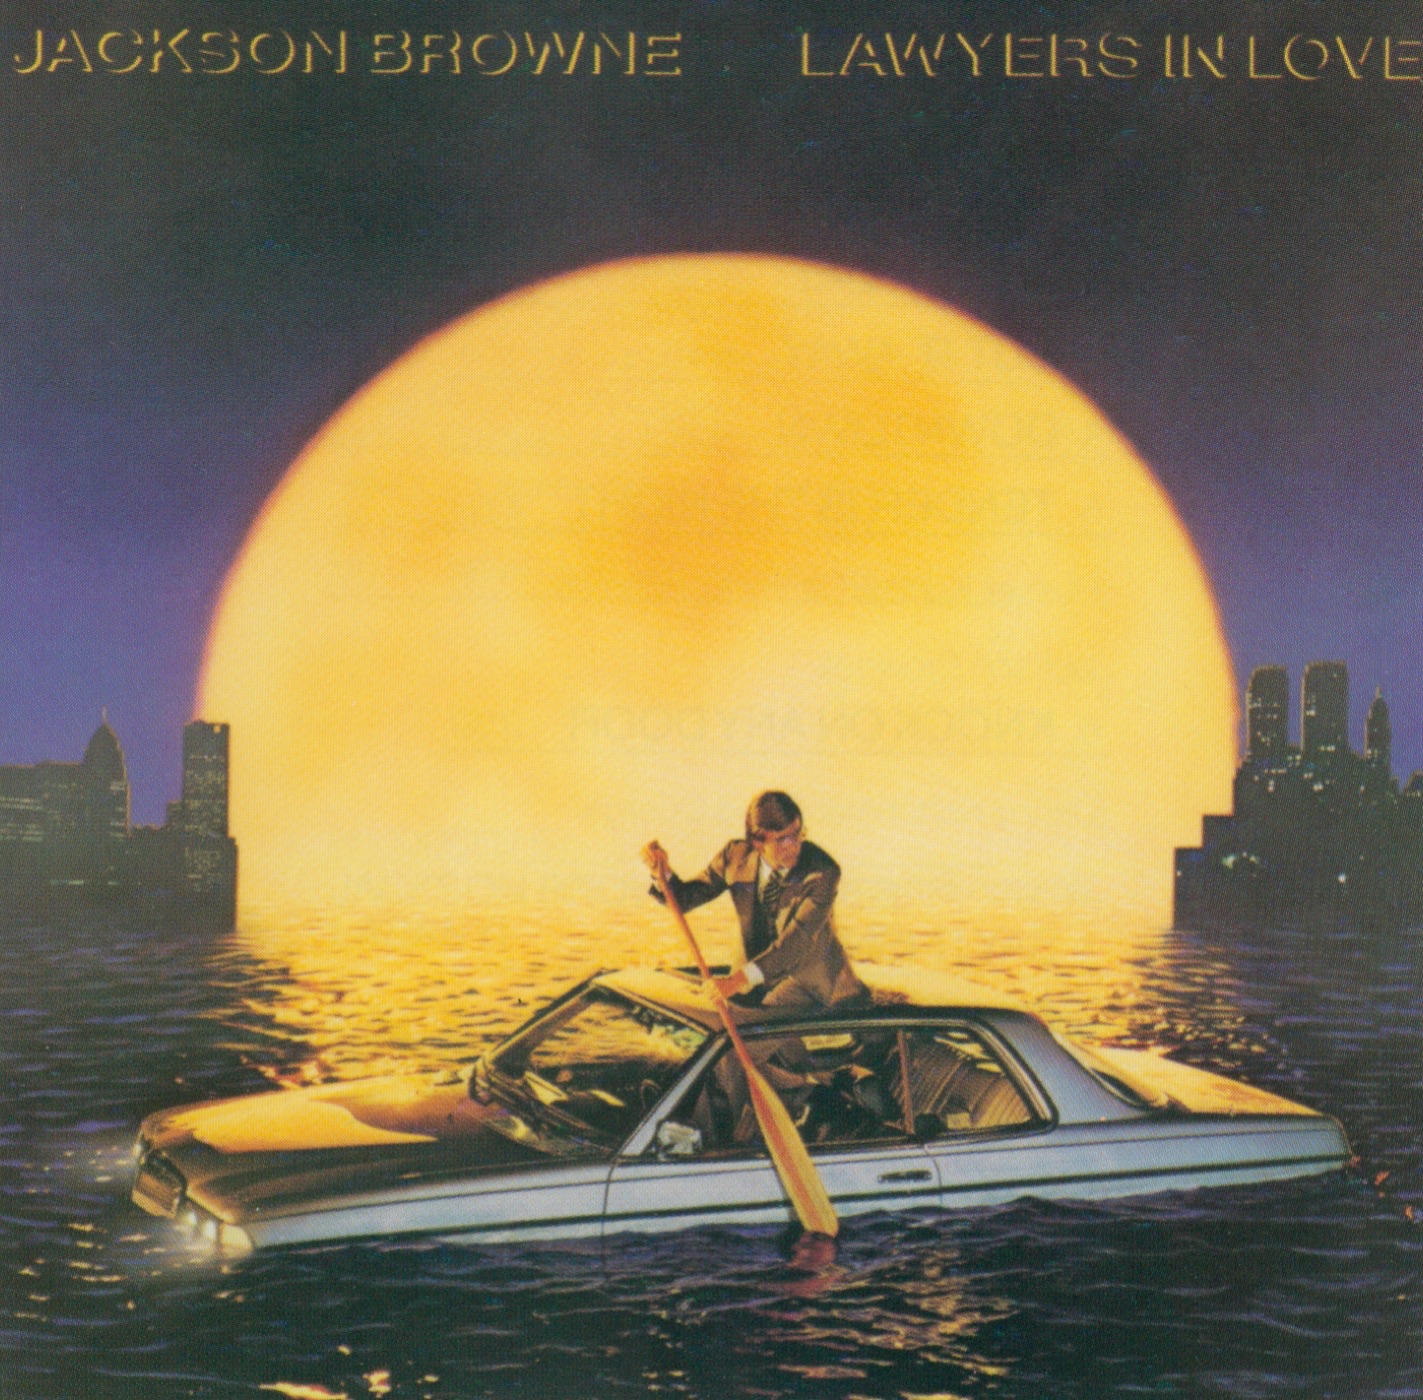 Art for Lawyers In Love by Jackson Browne